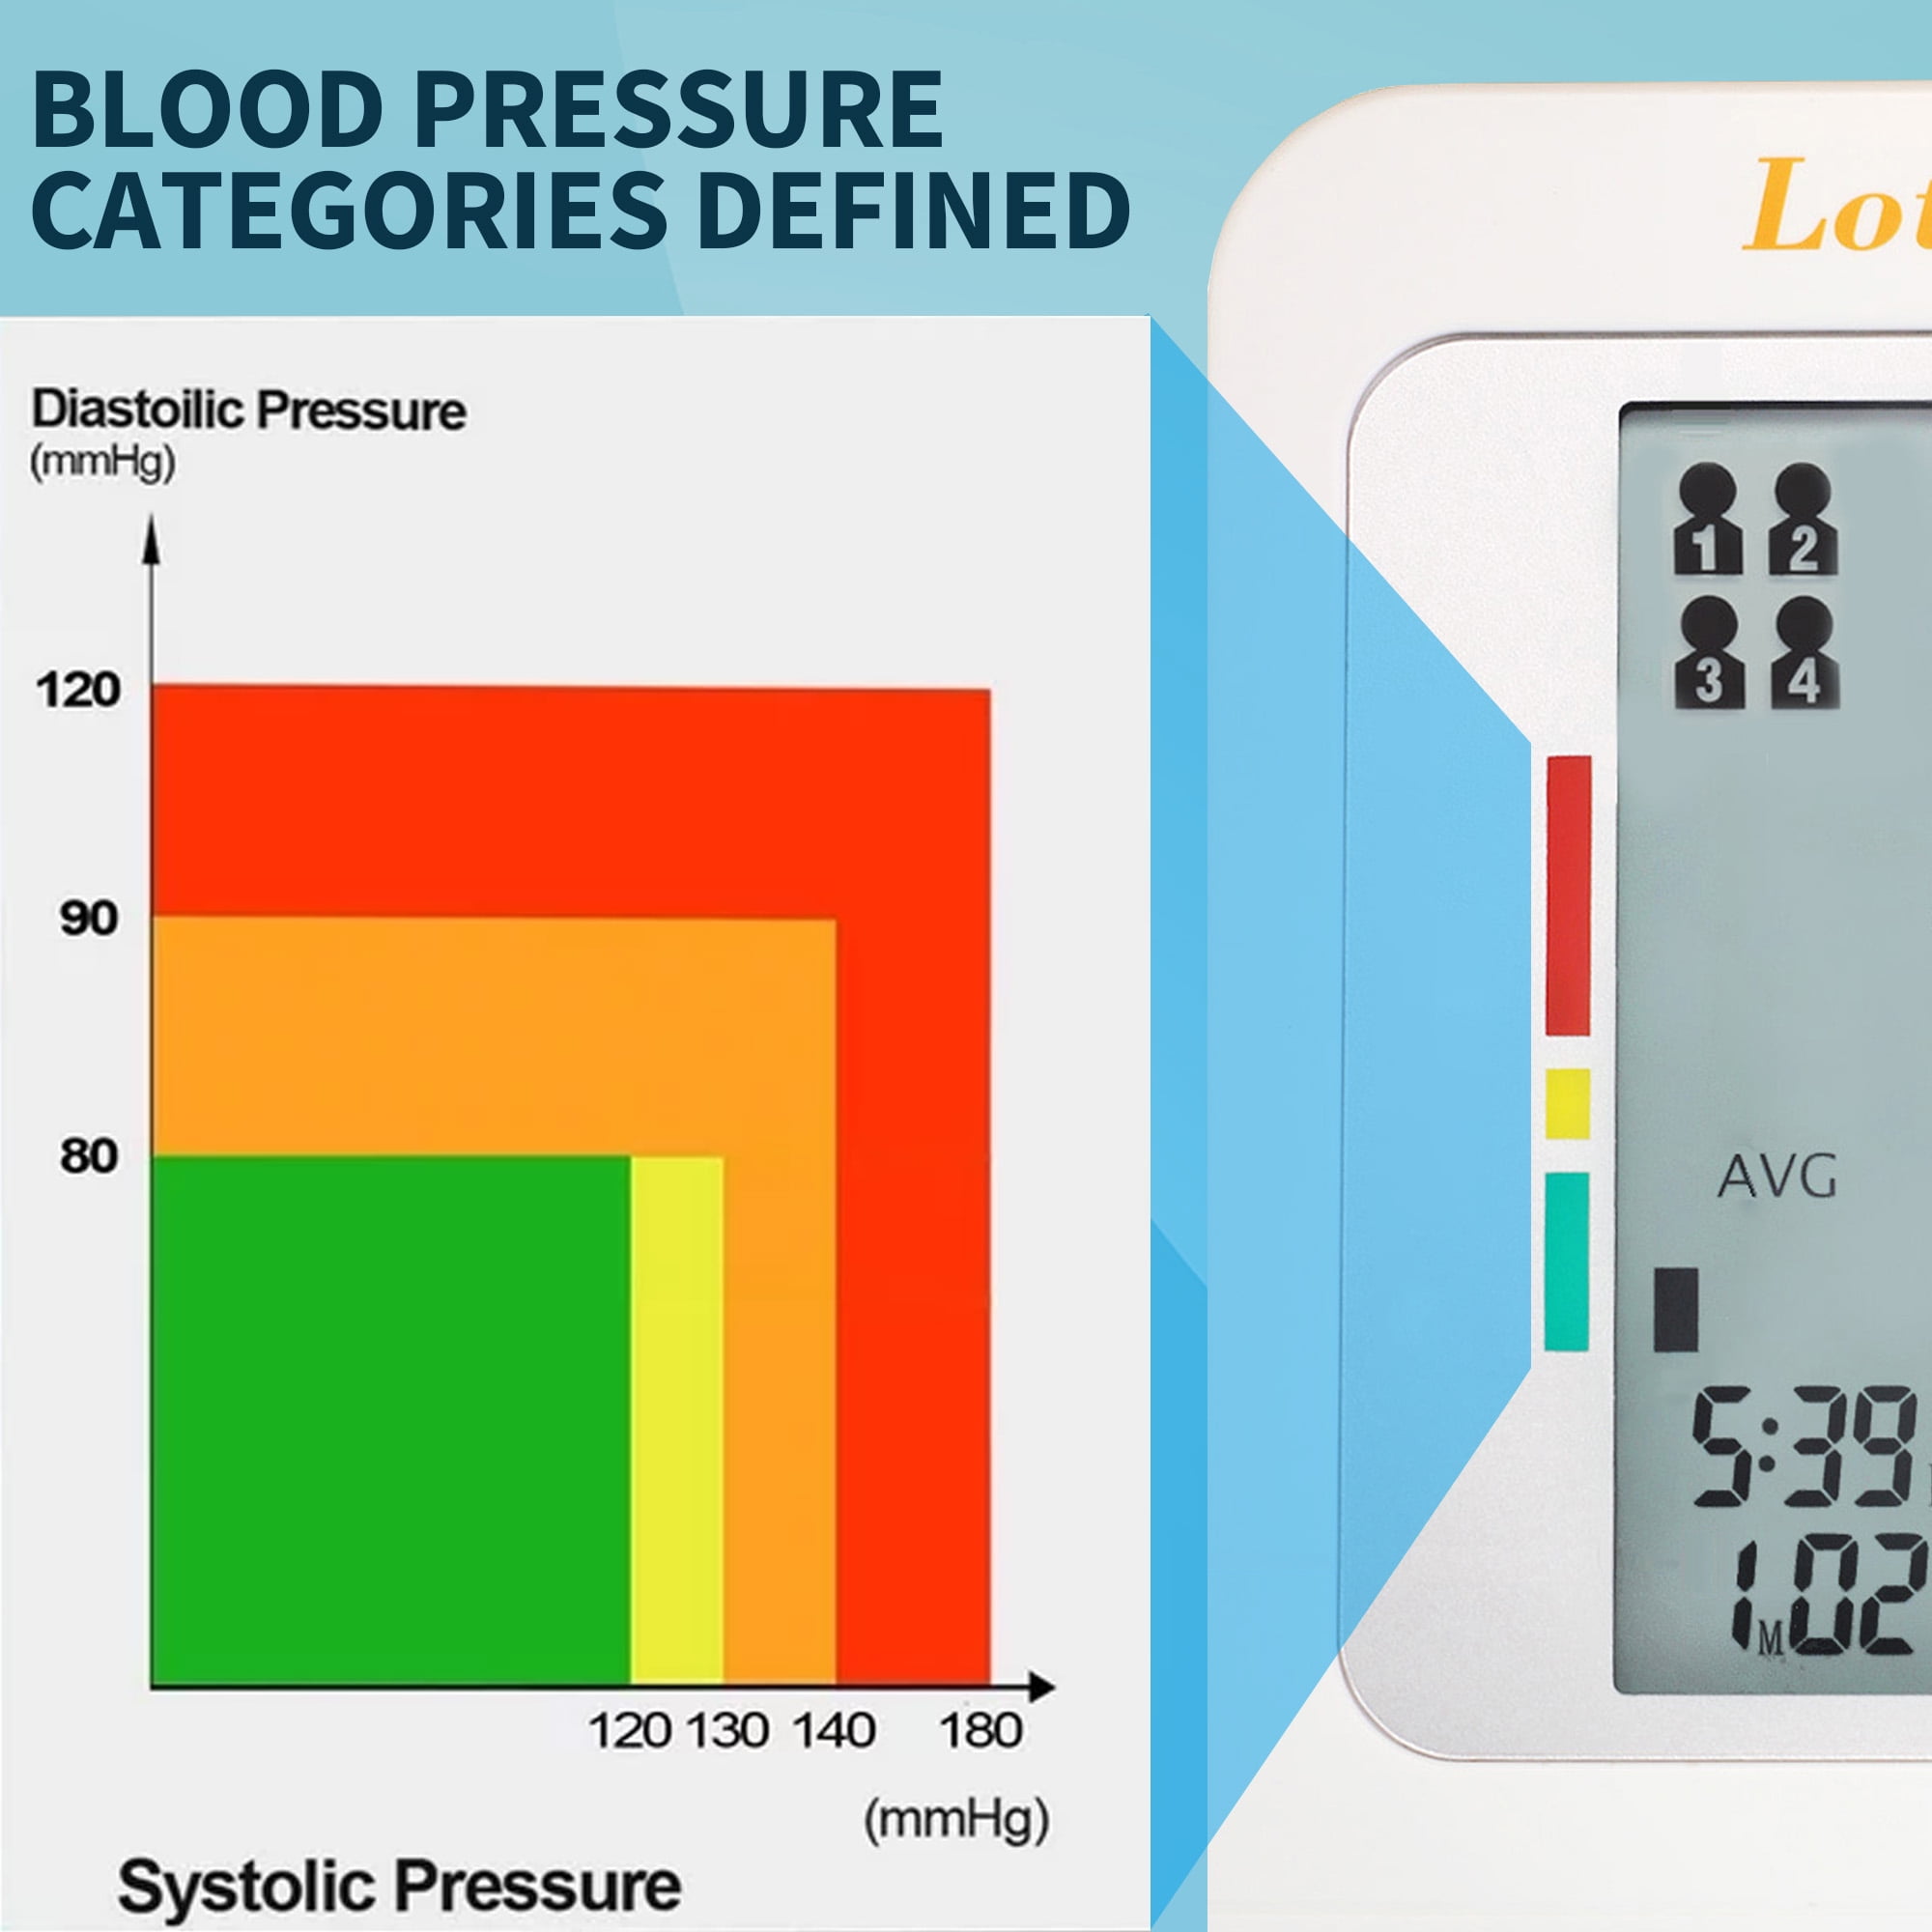 Lotfancy FDA Approved Blood Pressure Monitor Universal